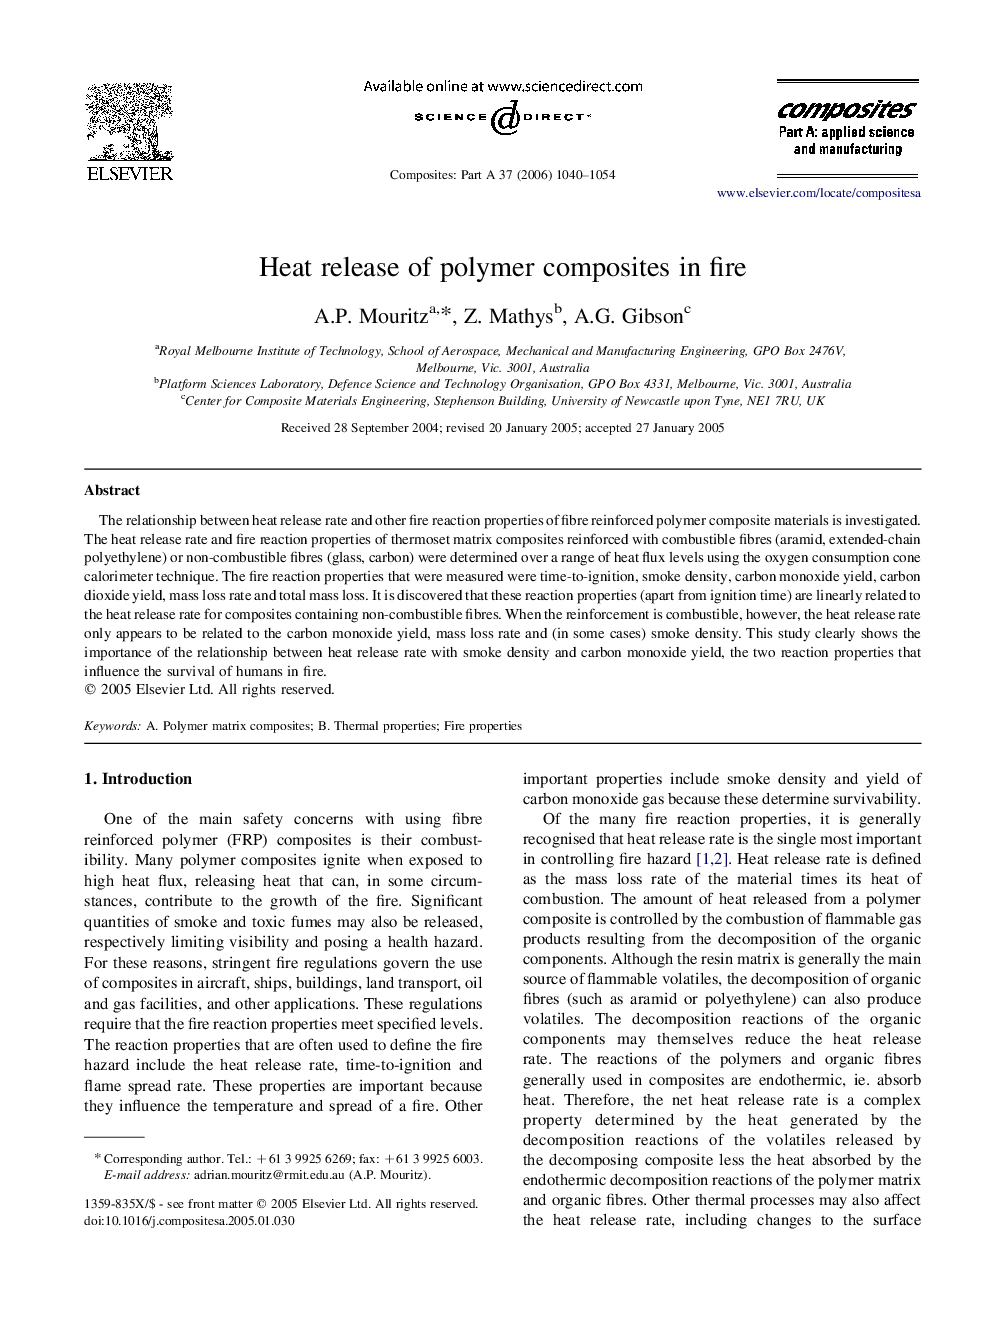 Heat release of polymer composites in fire